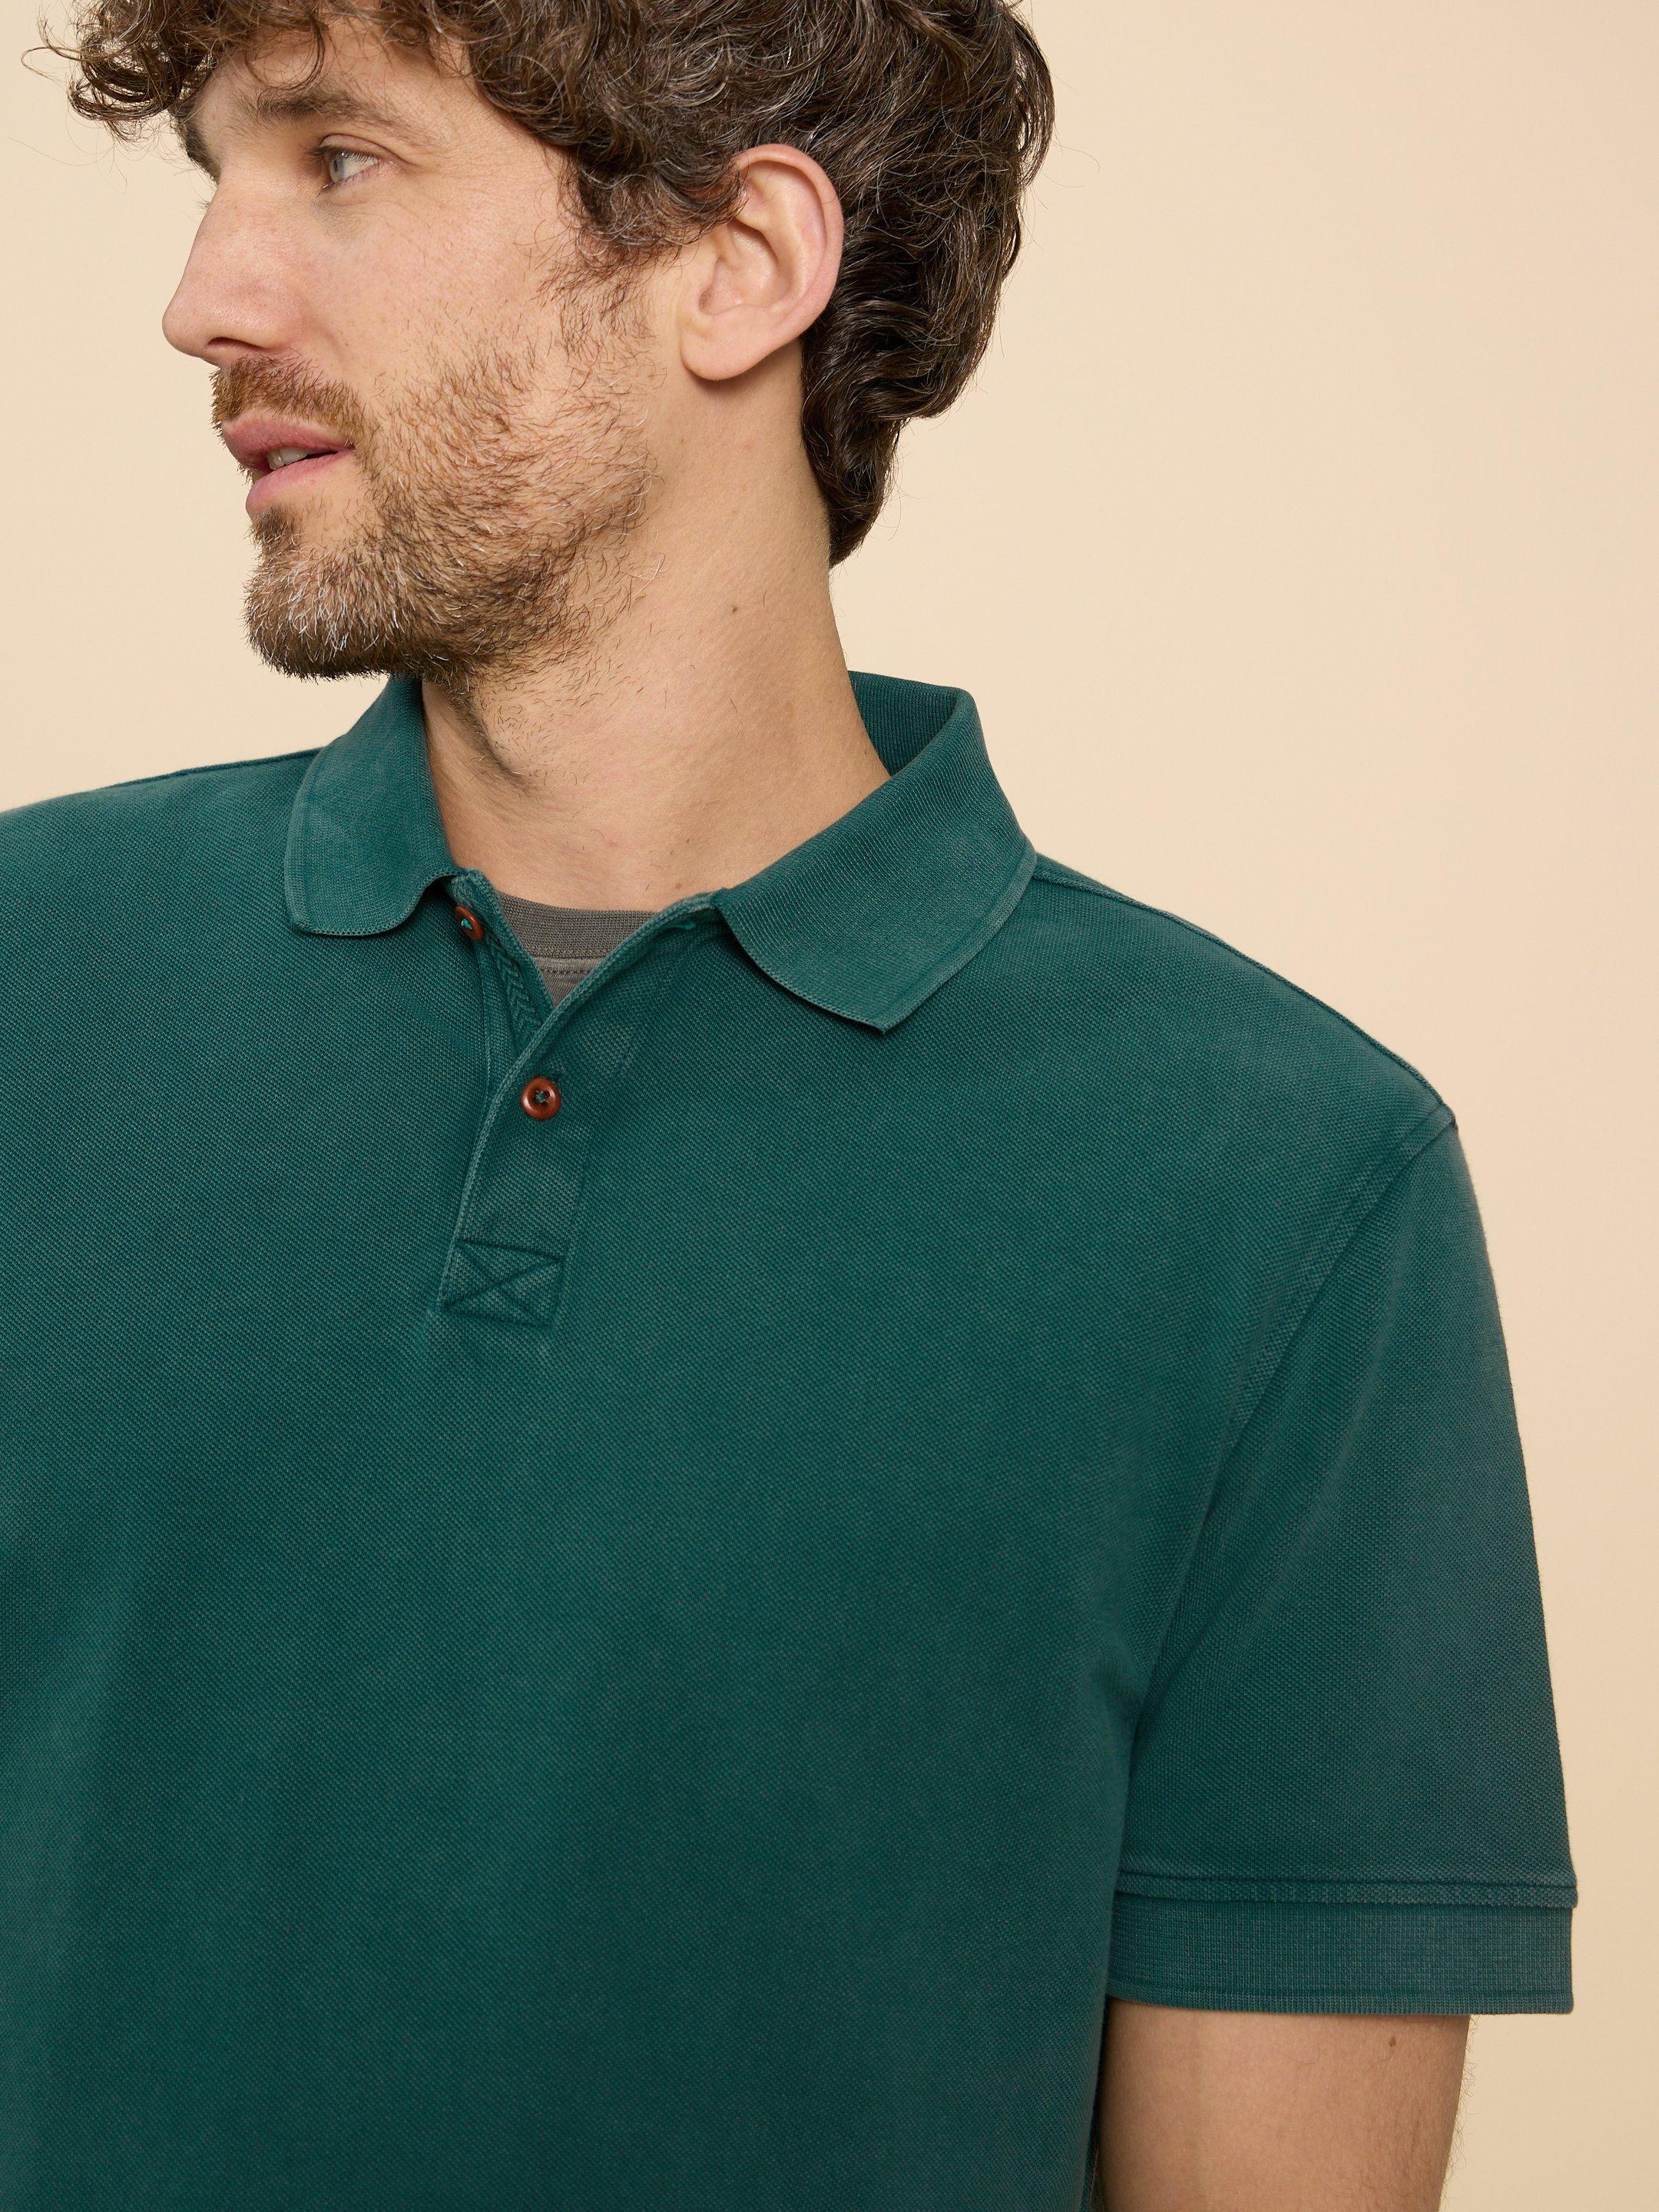 Utility Polo in DK TEAL - MODEL FRONT